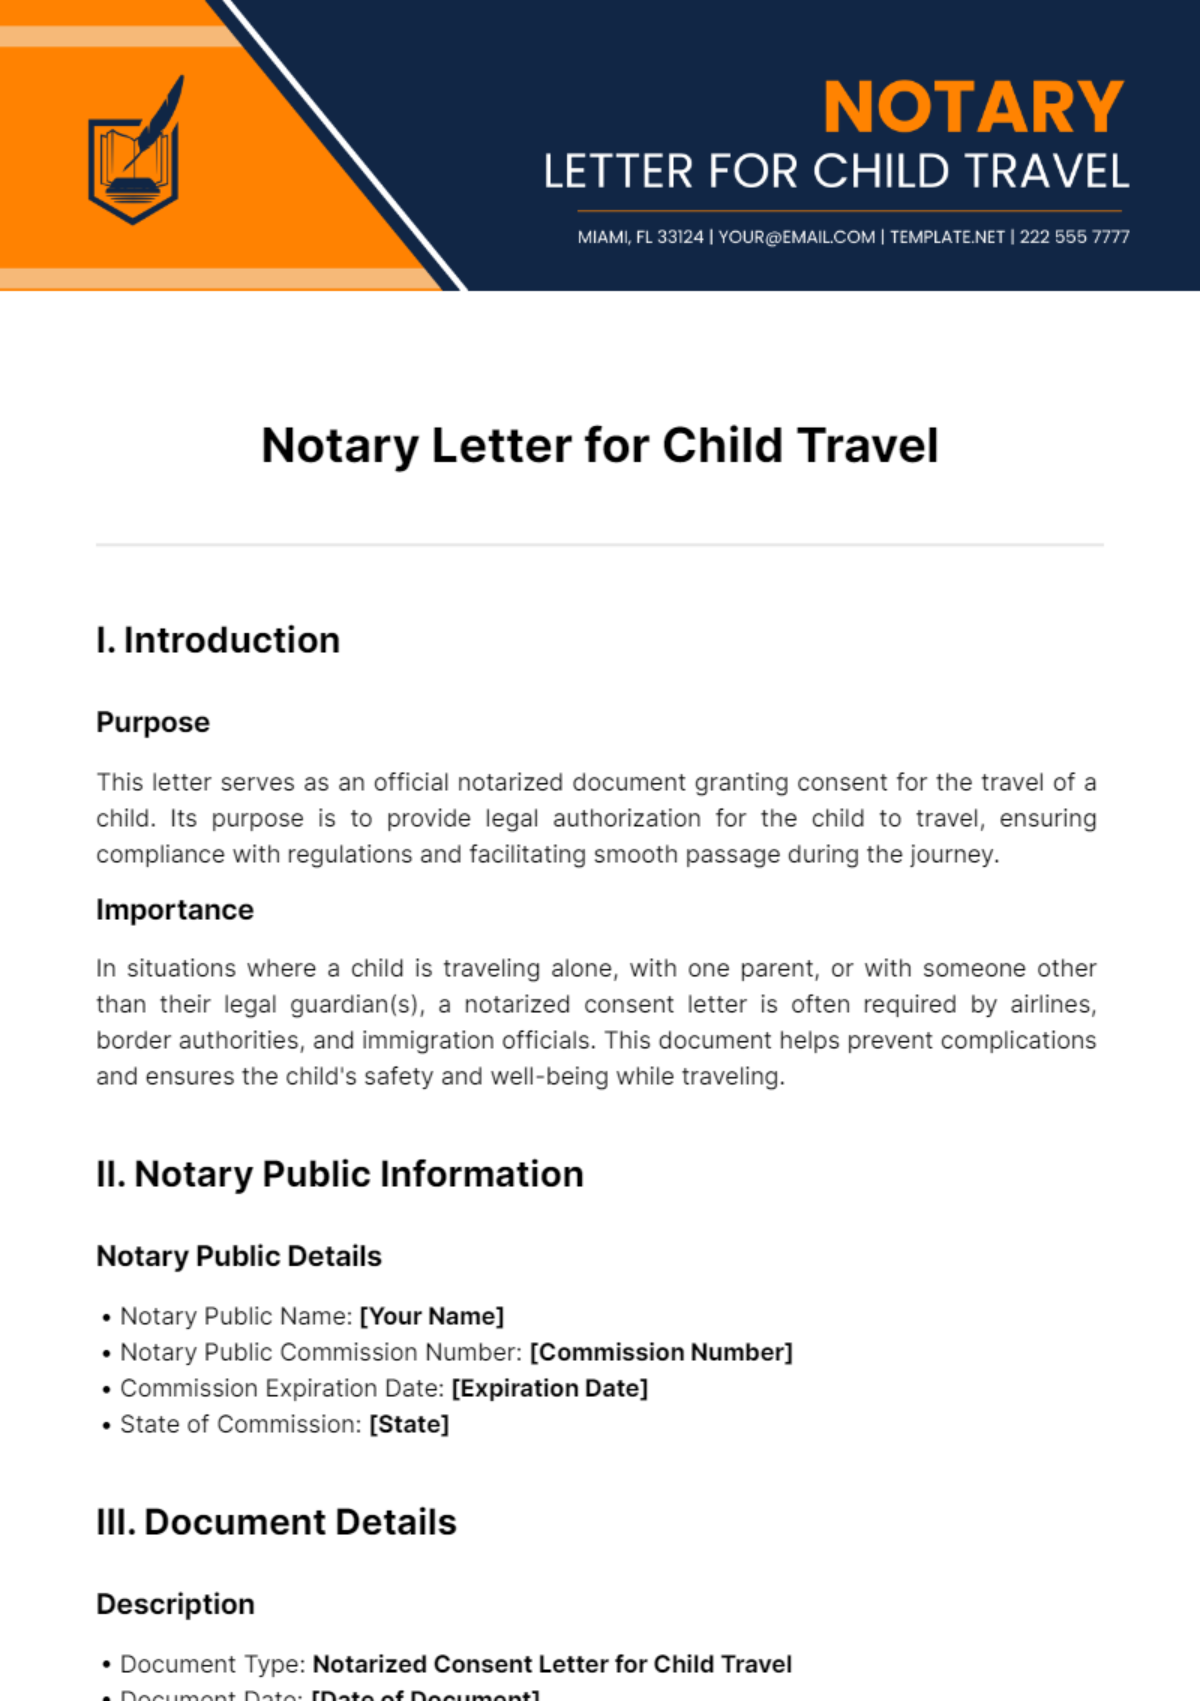 Free Notary Letter for Child Travel Template